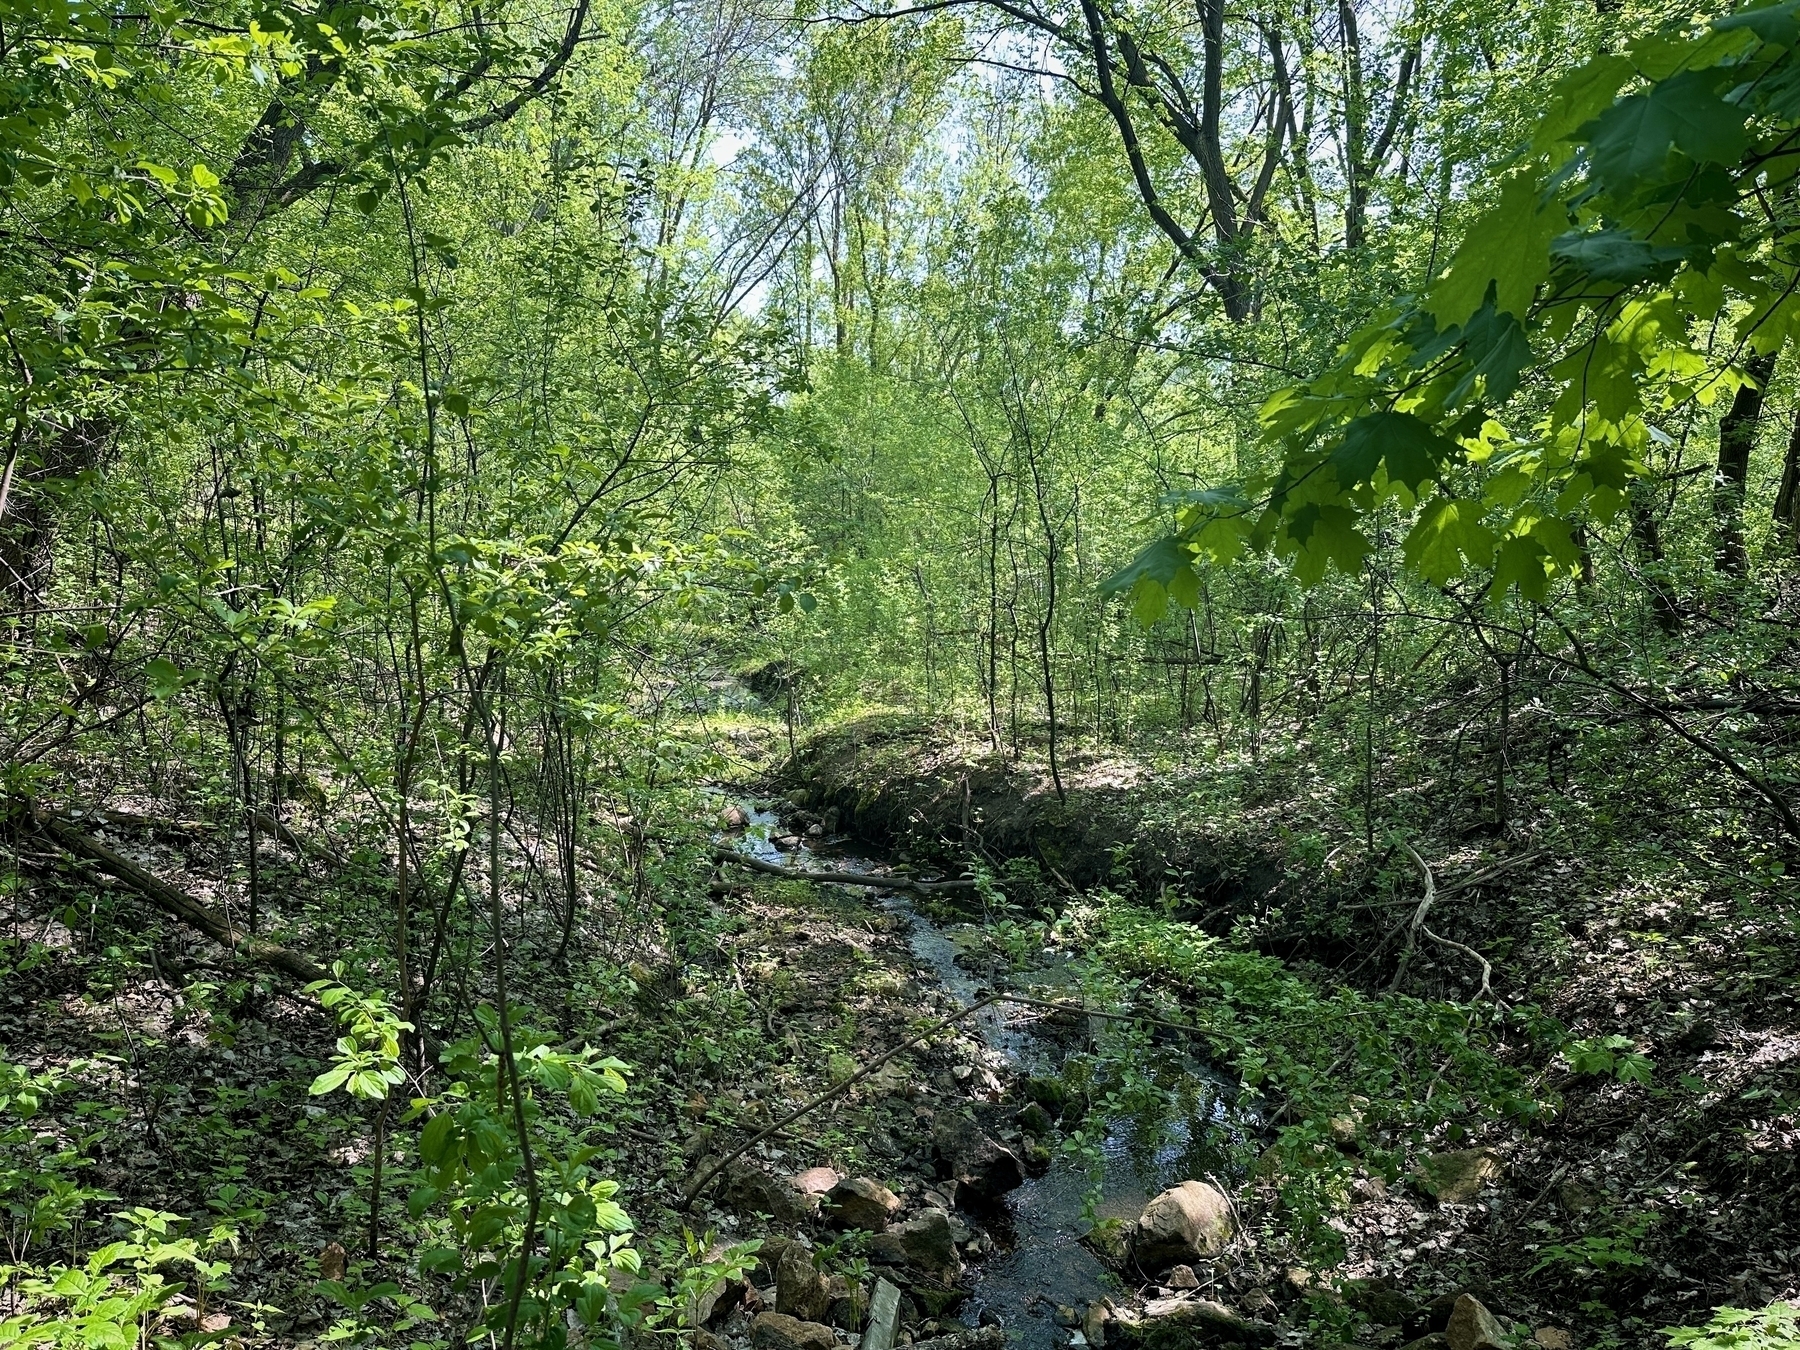 A small stream meanders through a dense green forest under a clear sky.